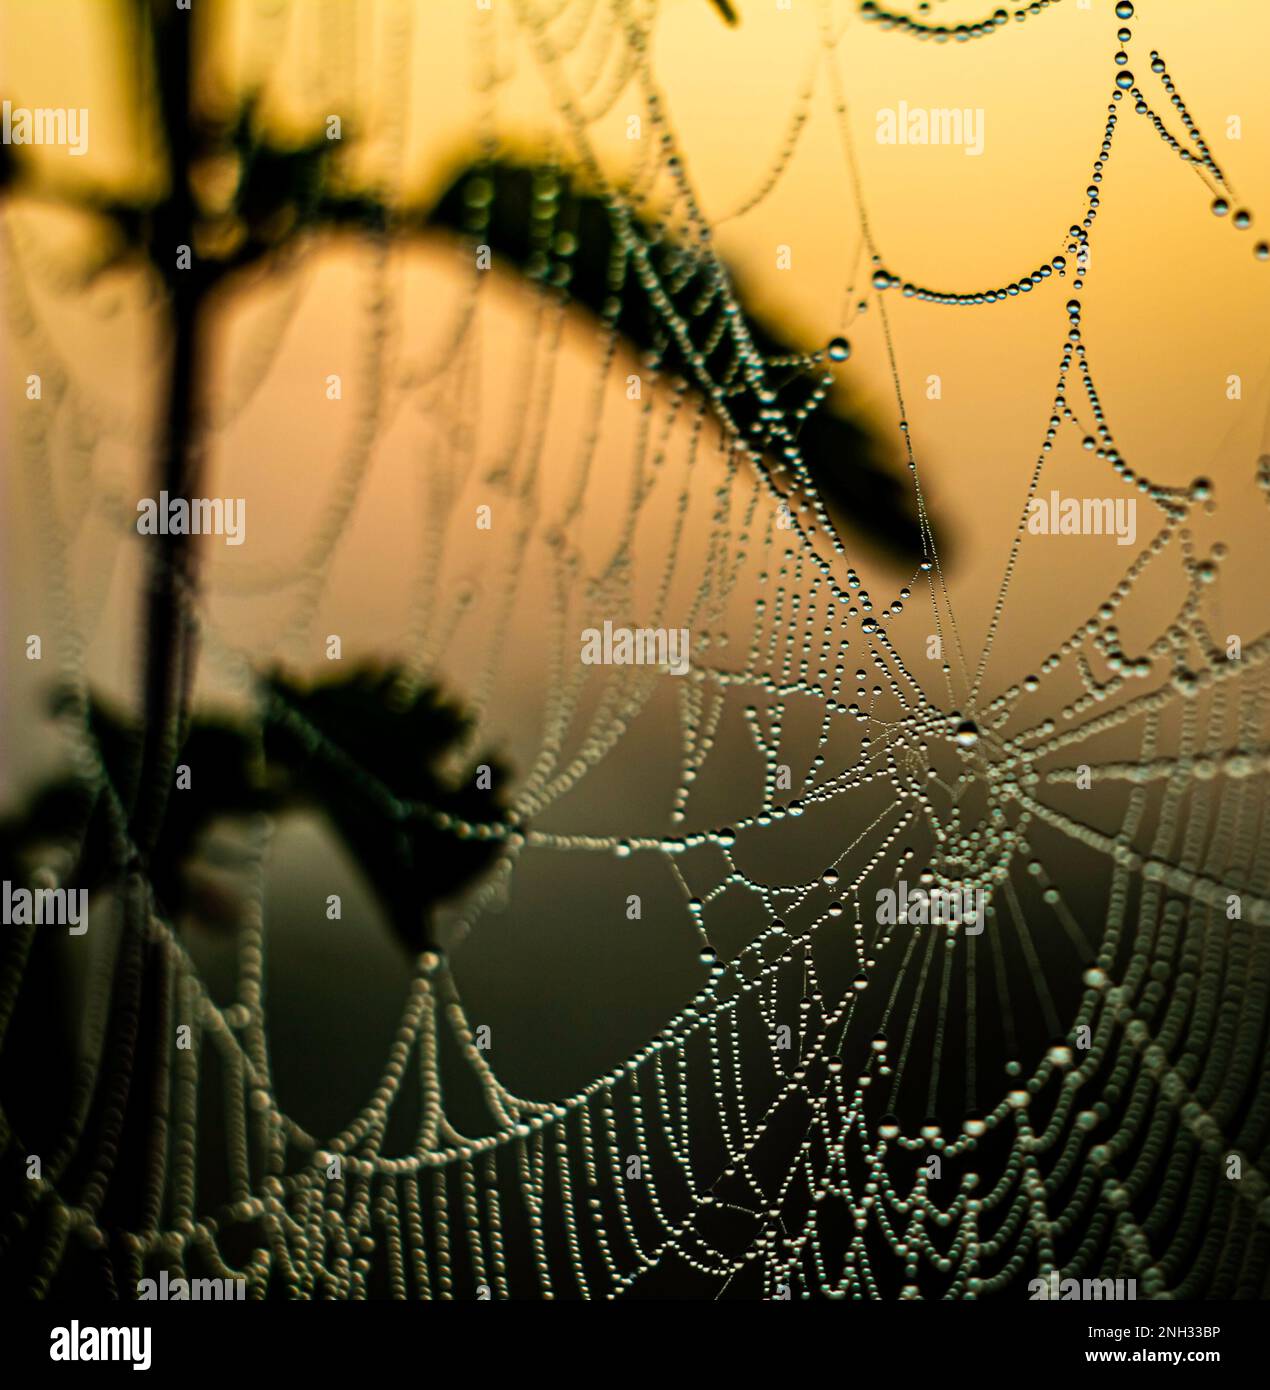 Dew drops on a web glisten in the morning sunrise light with a defocused nettle stalk in the background Stock Photo